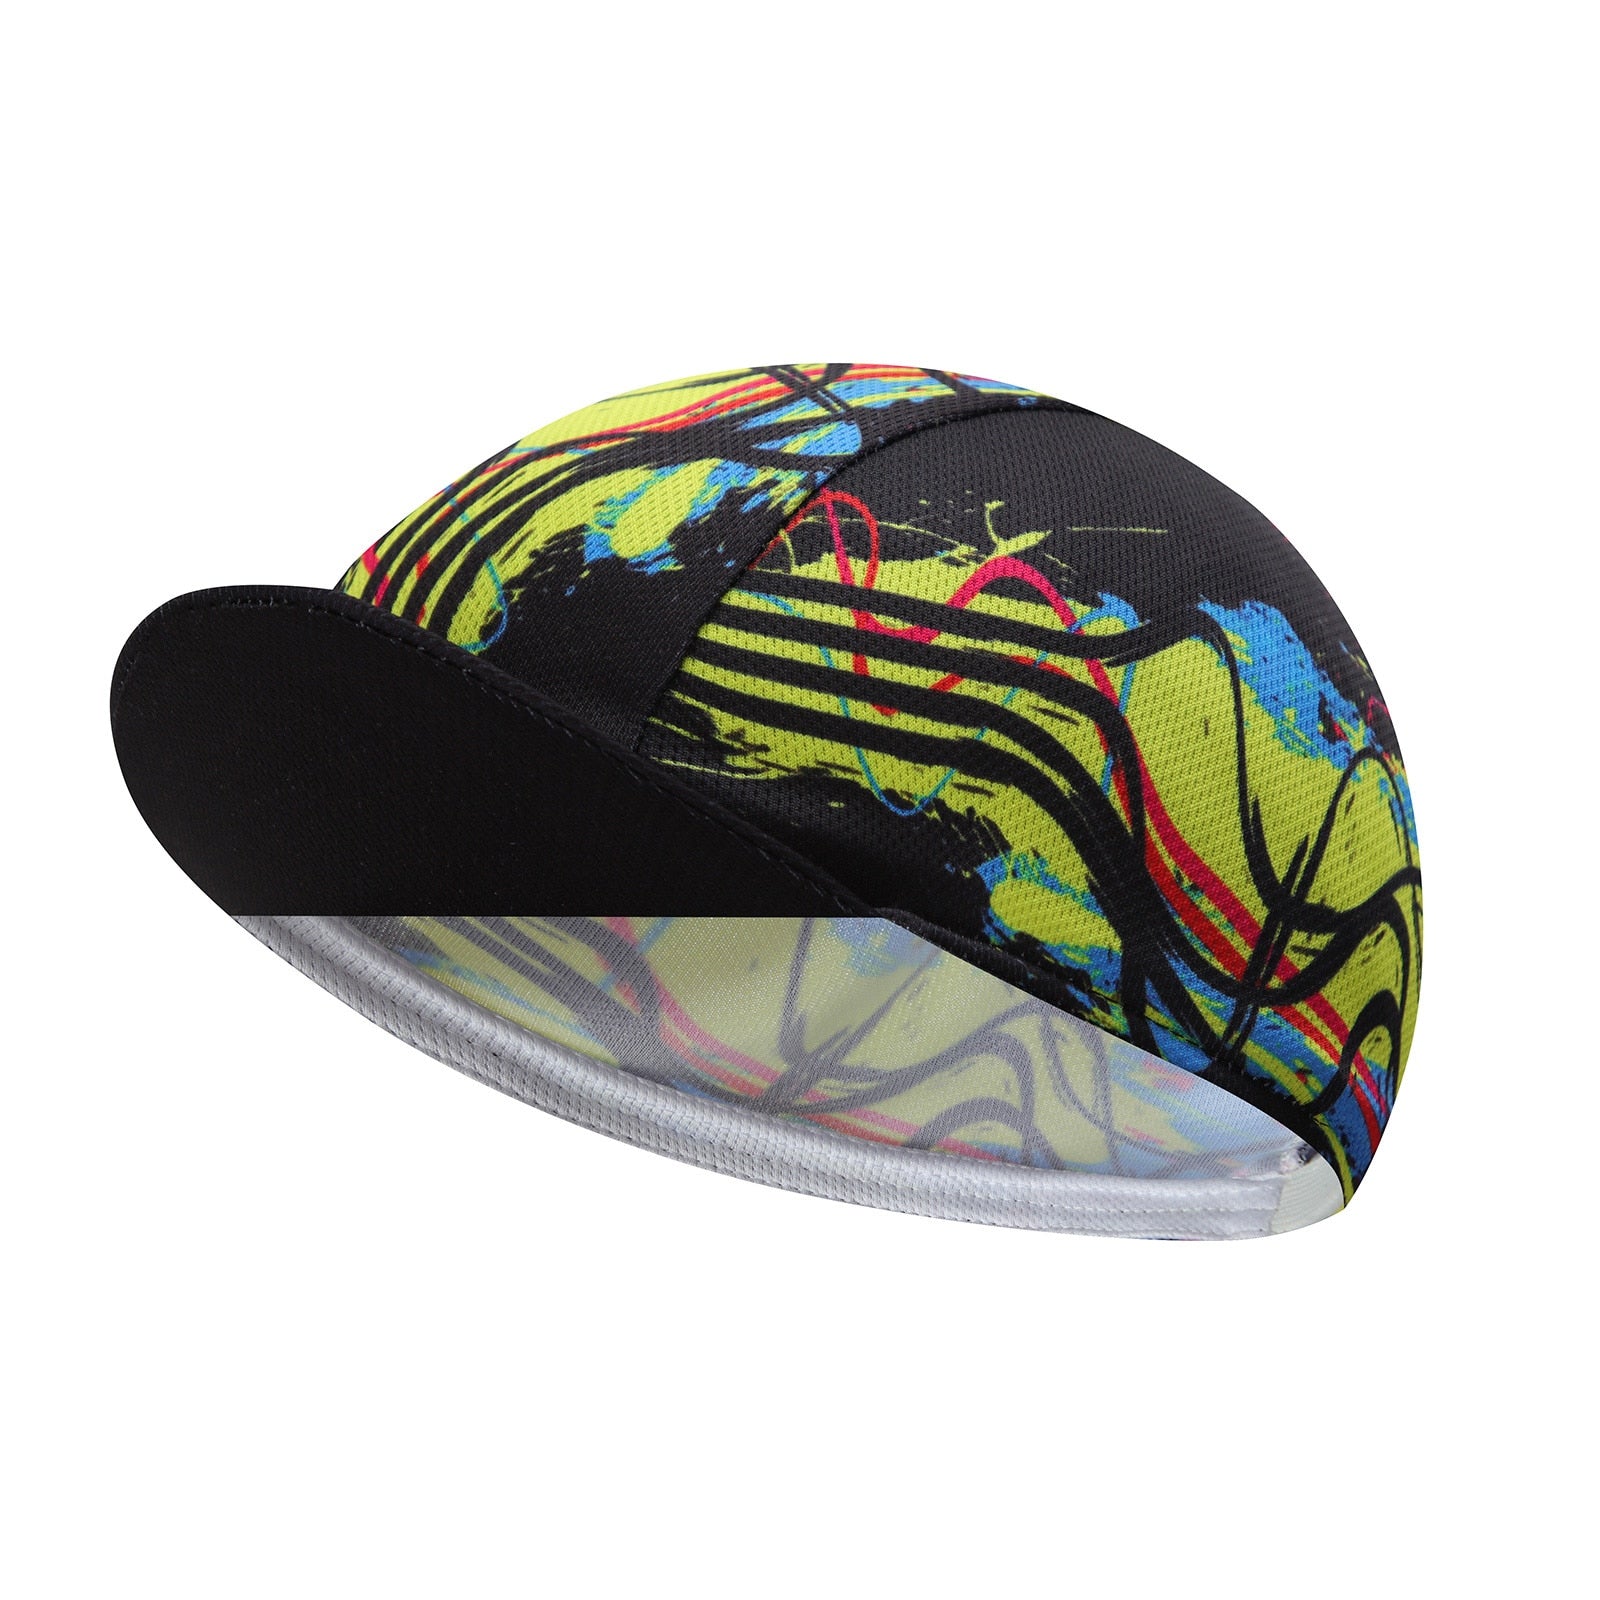 Men's Cycling Cap - Polyester Cycling Hat-Under Helmet - Cycling Helmet Liner Breathable&Sweat Uptake